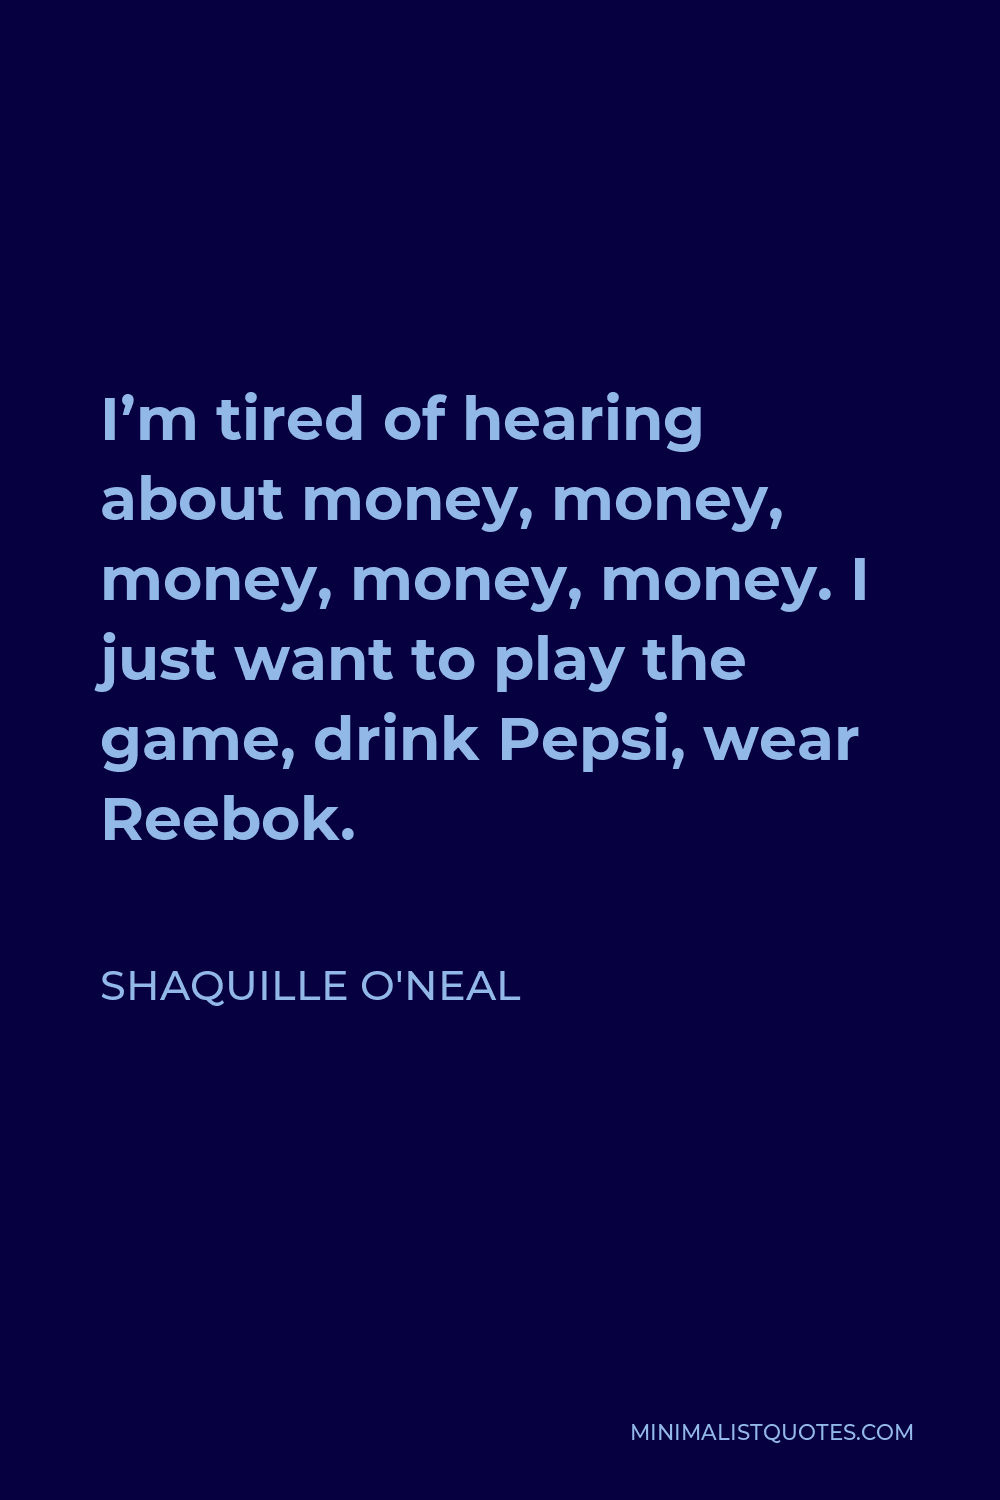 Shaquille O'Neal Quote - I’m tired of hearing about money, money, money, money, money. I just want to play the game, drink Pepsi, wear Reebok.